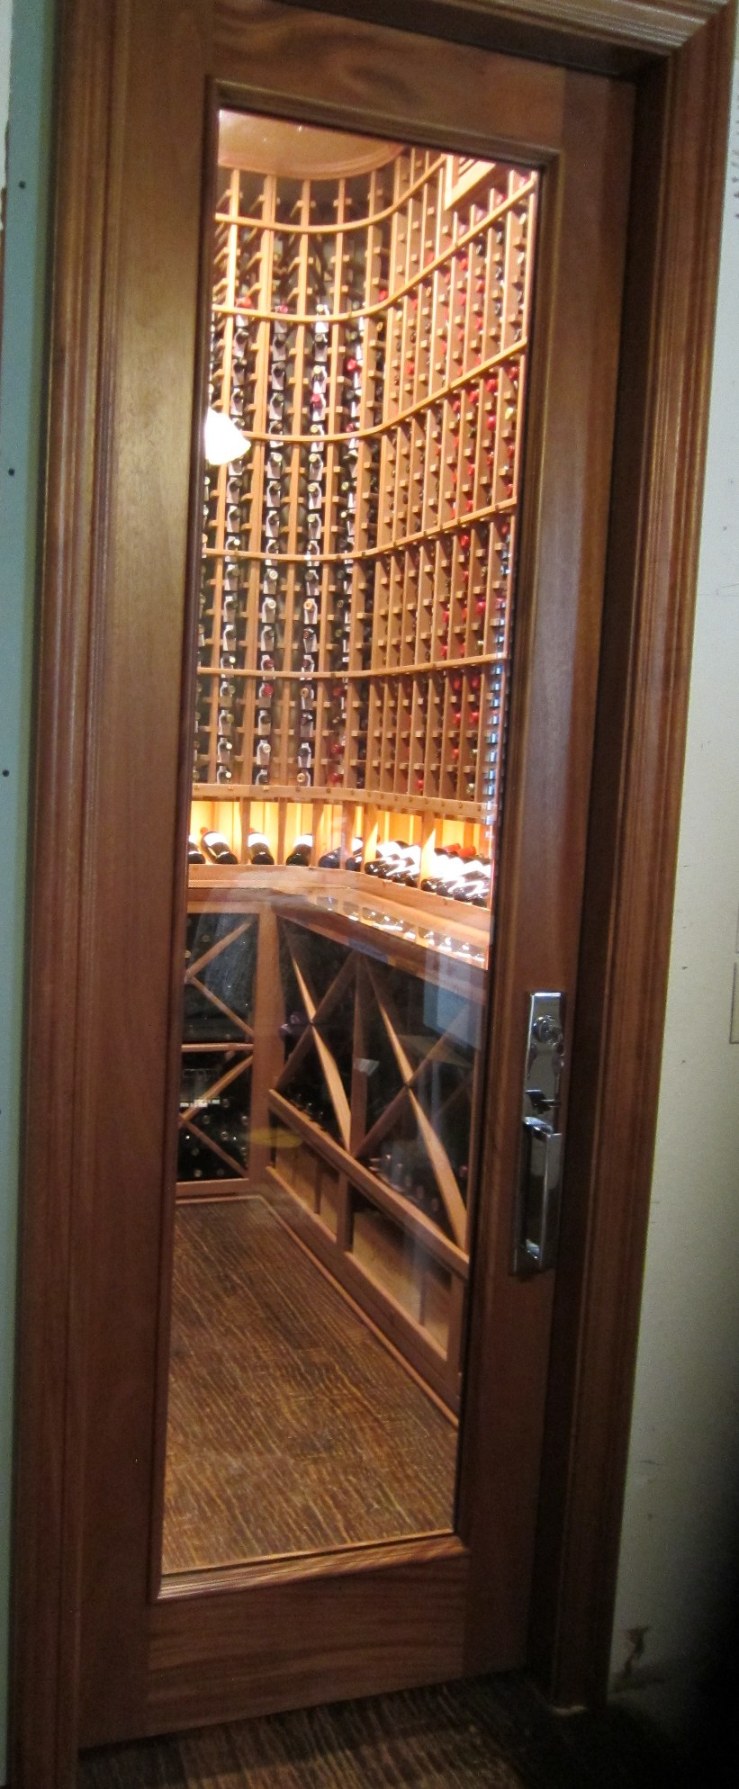 Barolo Glass Wine Cellar Door in Mahogany with Wheat Stain and Lacquer Designed by Seattle Master Builders